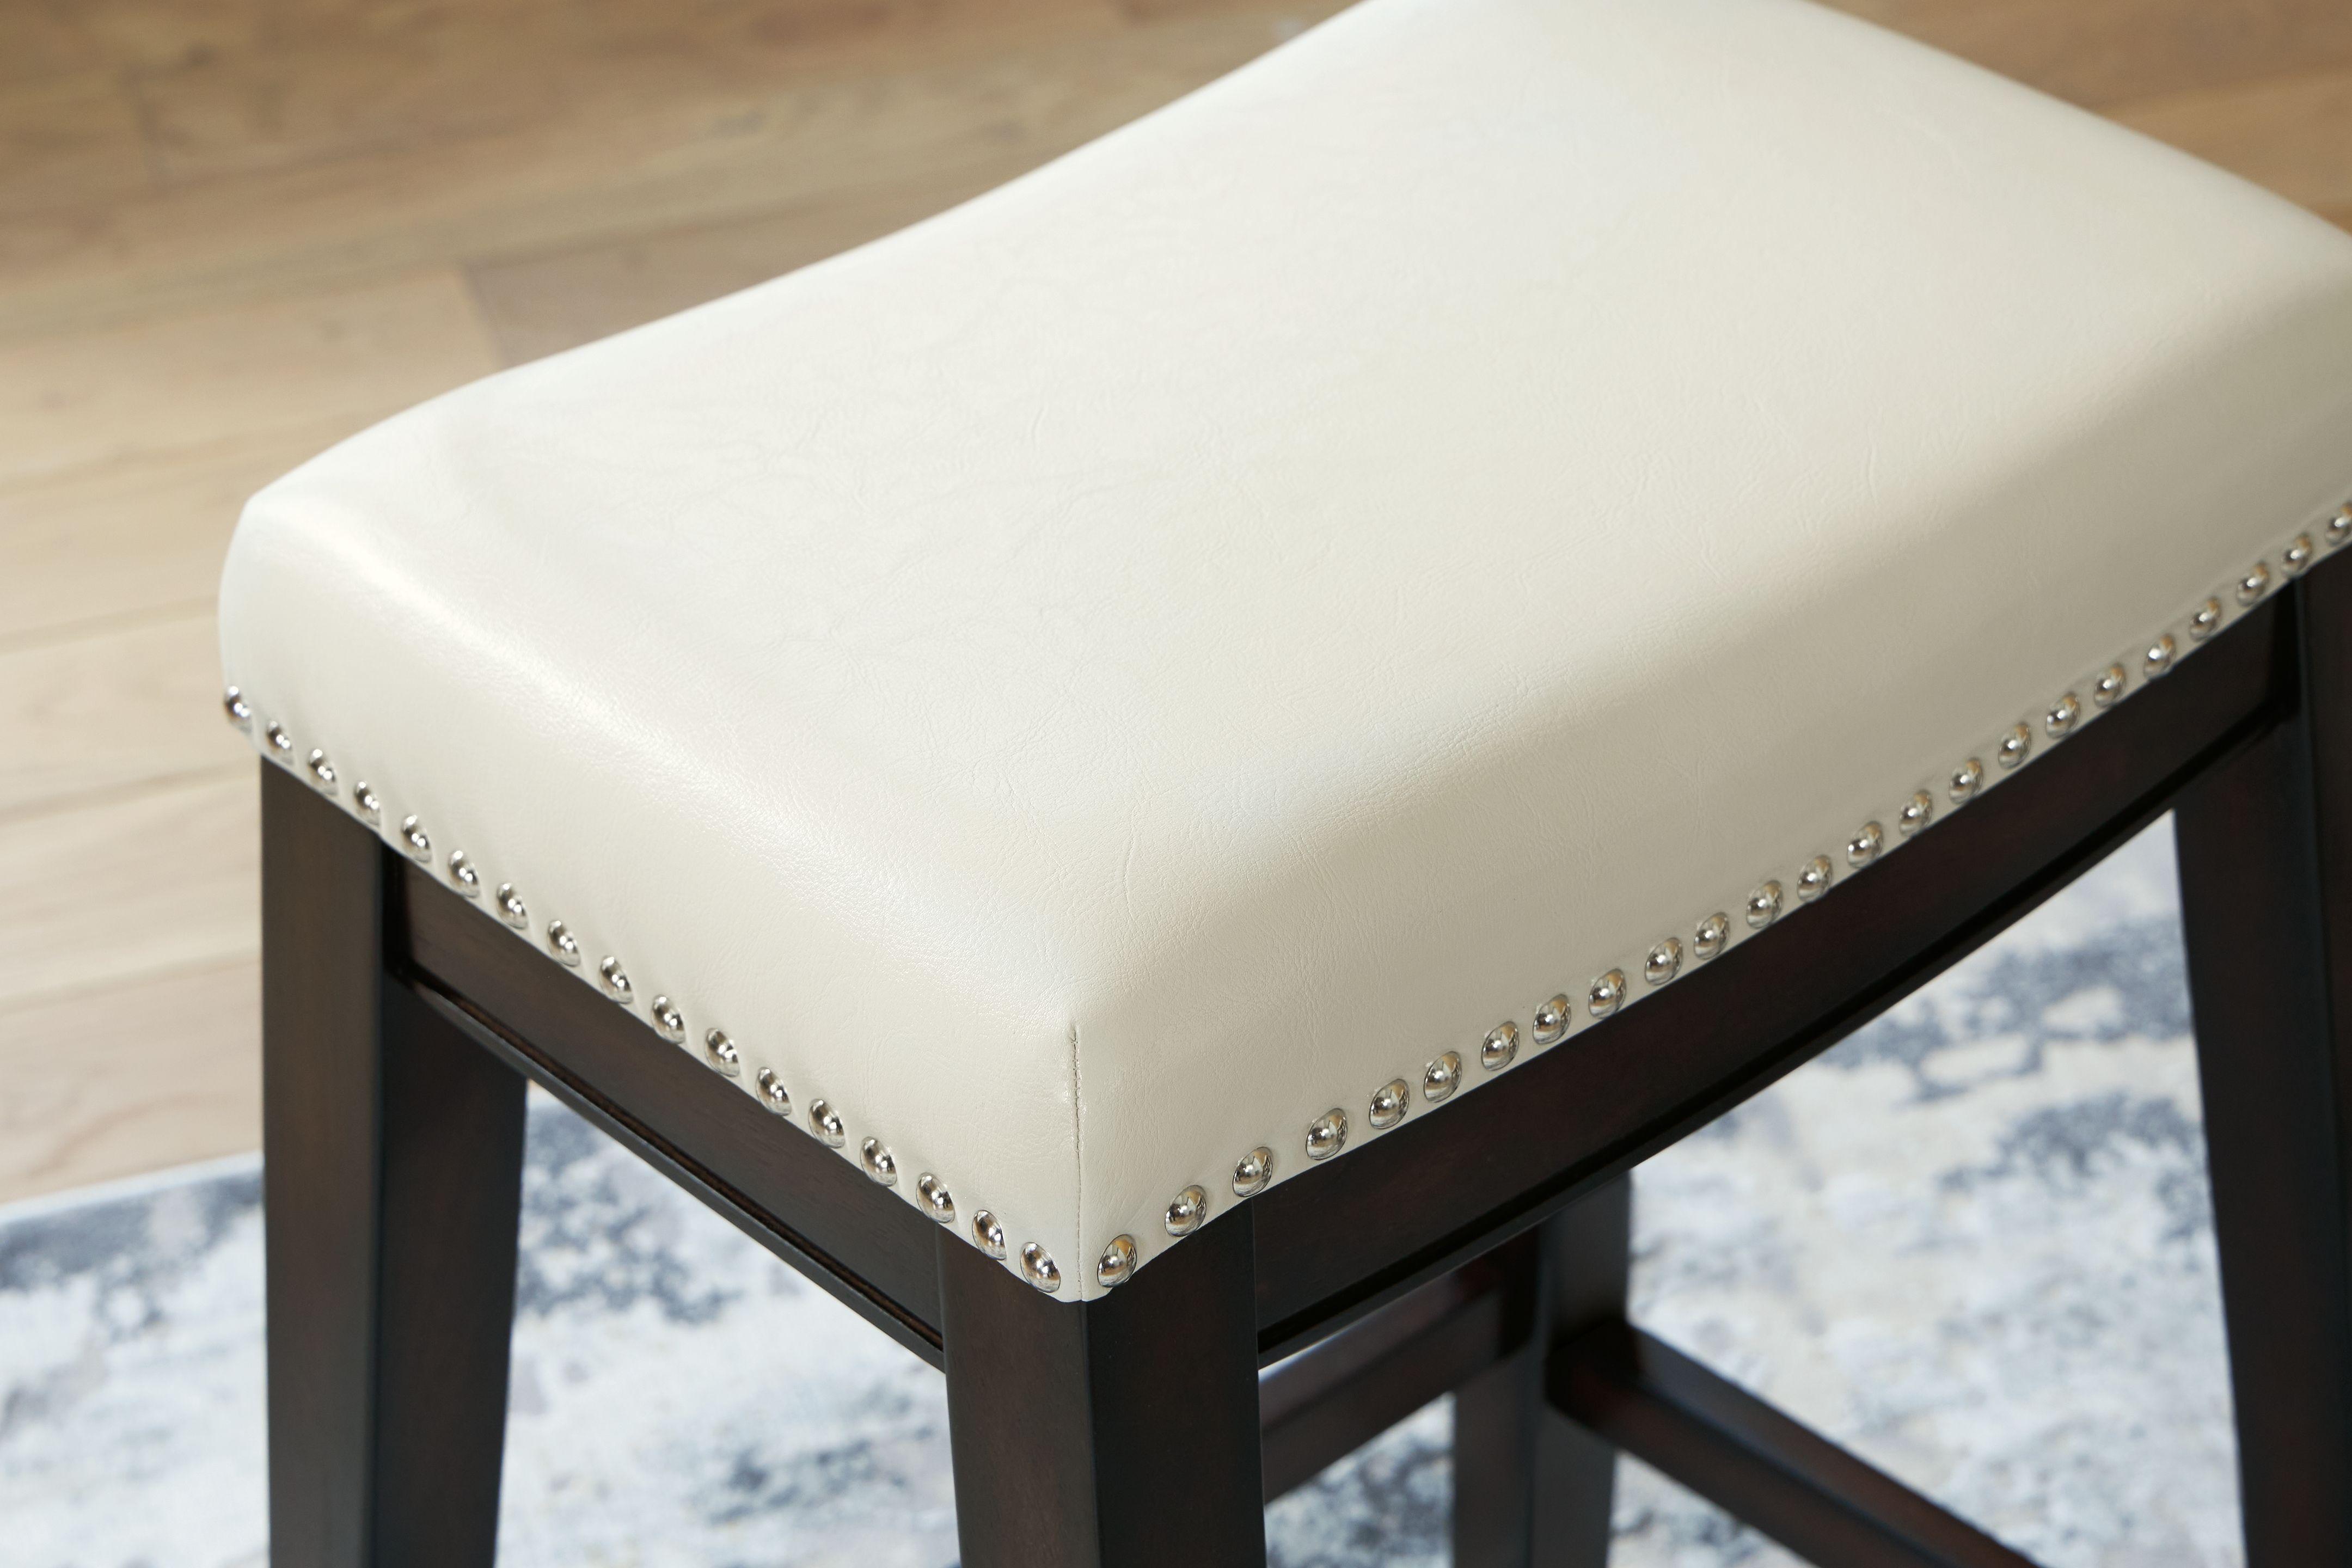 Signature Design by Ashley® - Lemante - Tall Upholstered Stool (Set of 2) - 5th Avenue Furniture